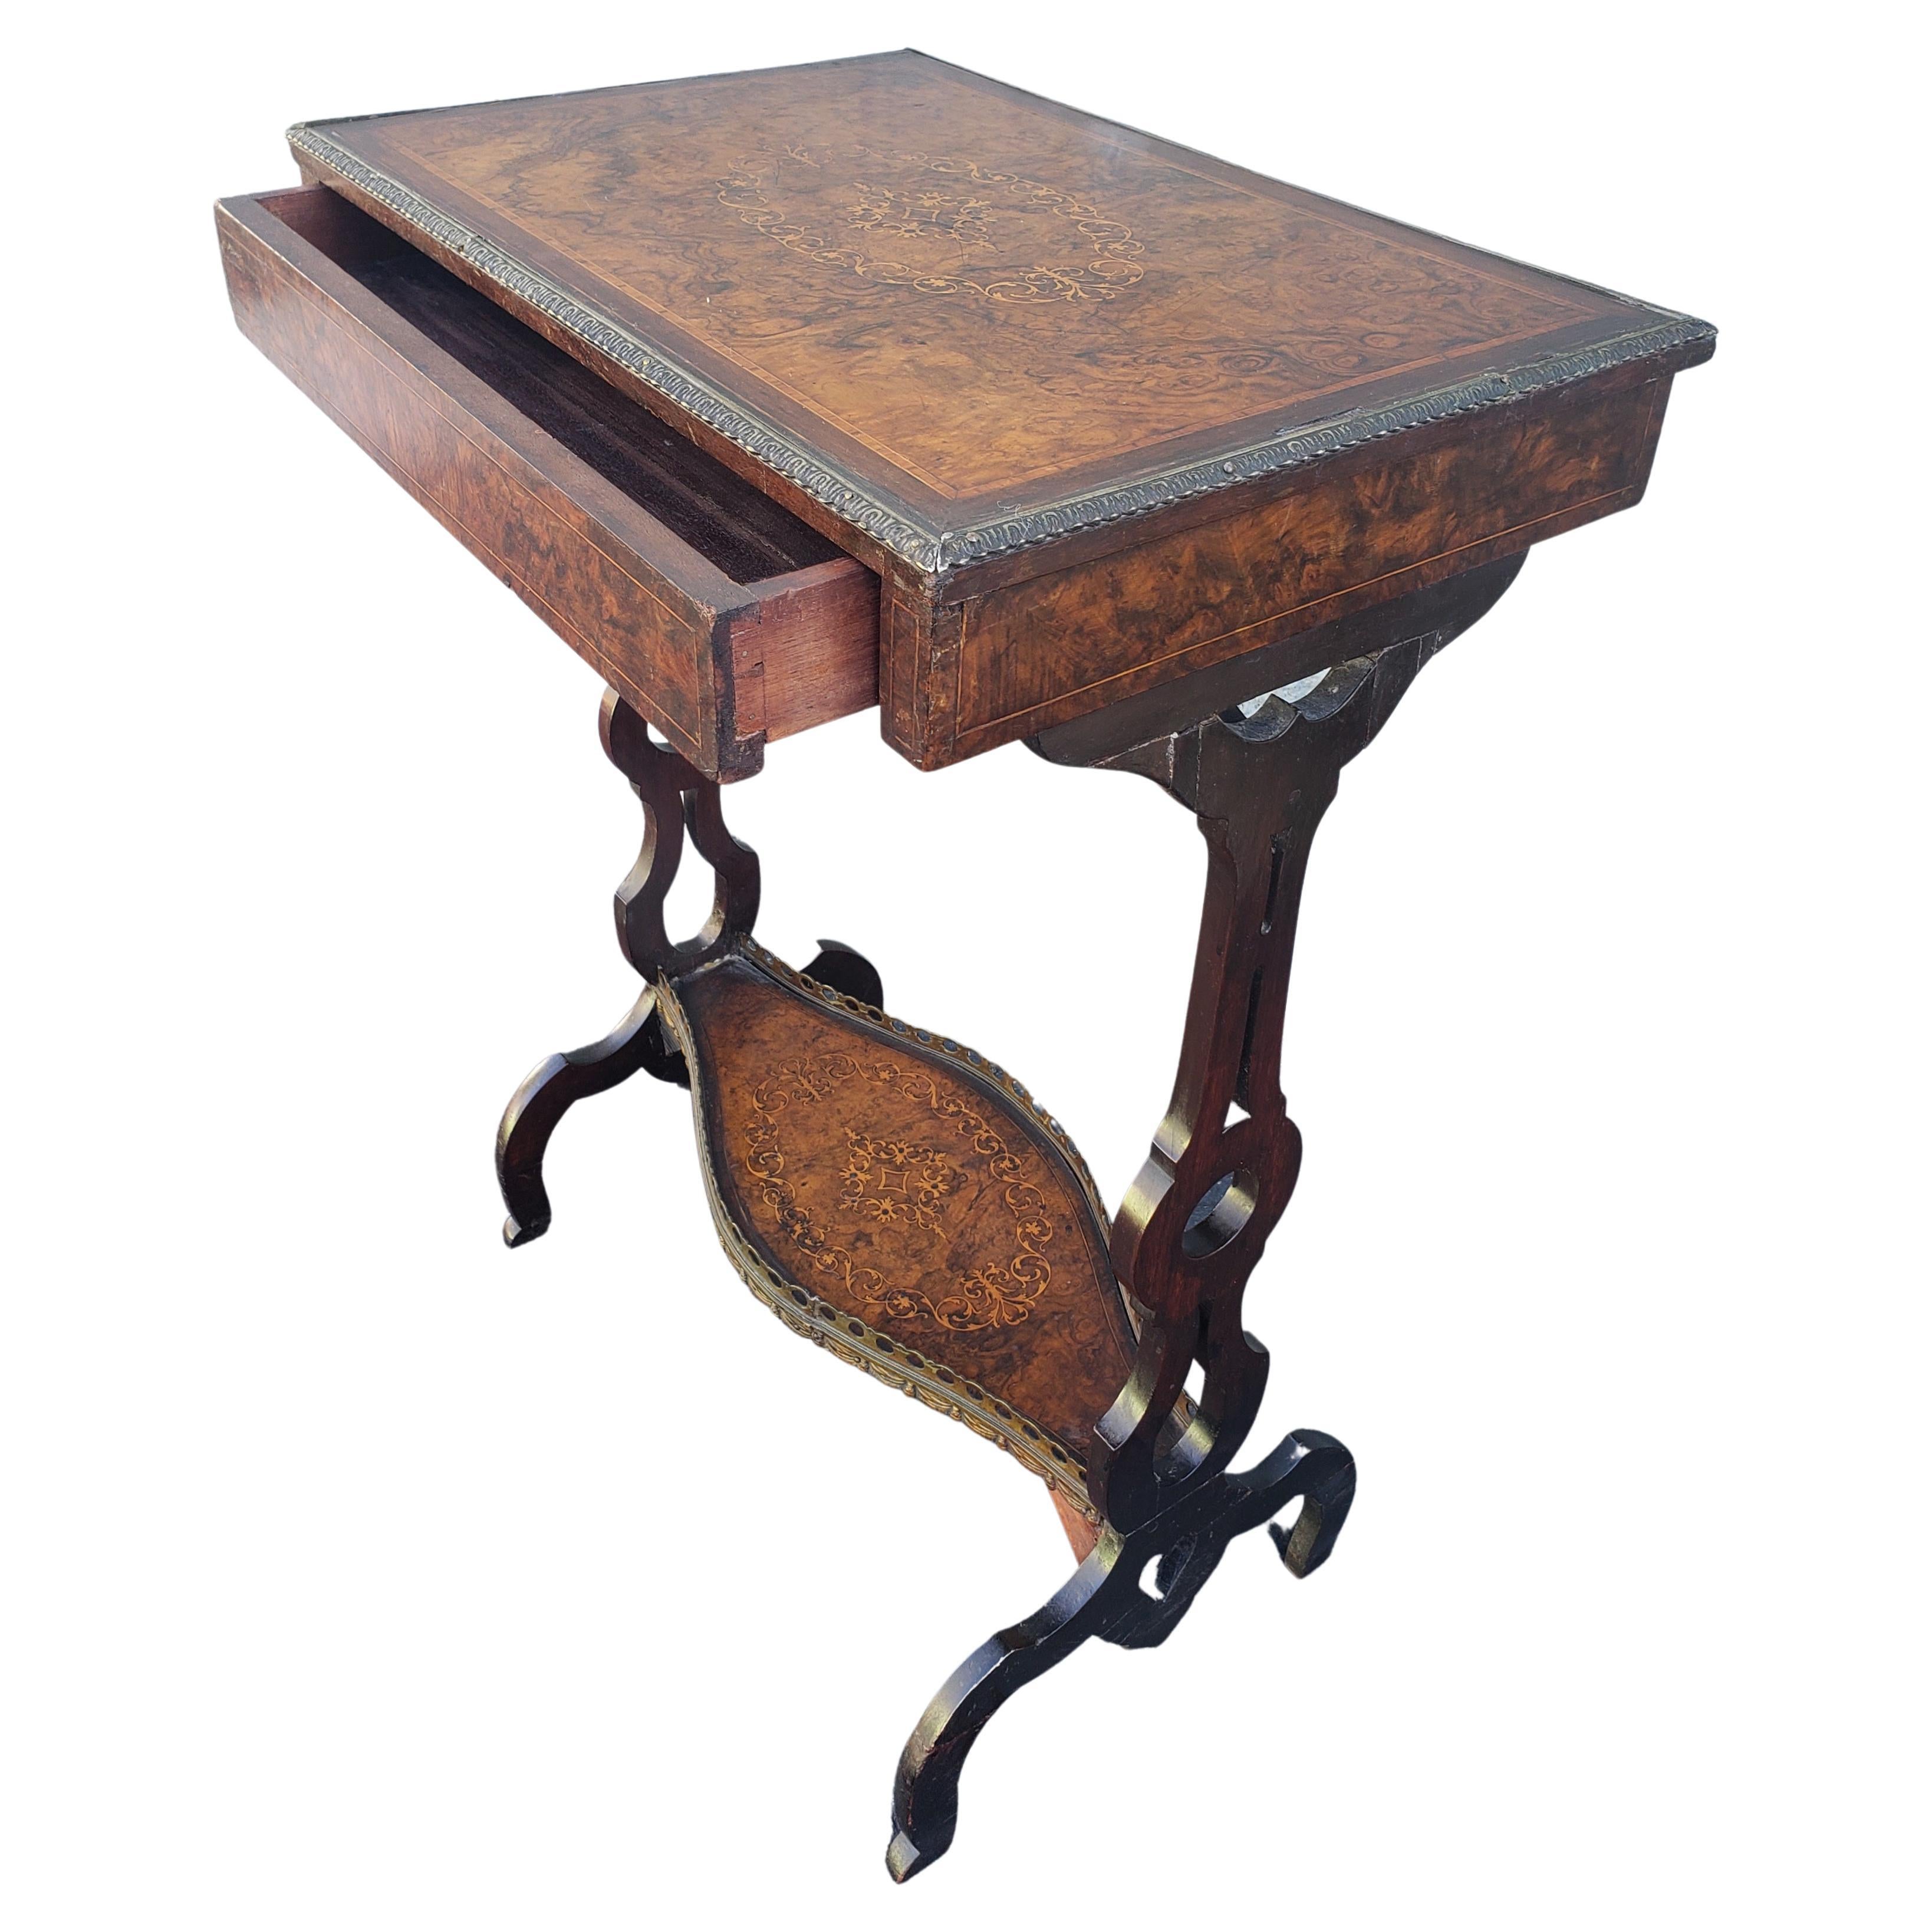 Hand-Crafted 1840s T.H. Filmer English Walnut Burl Tea Table with Metal Galleries